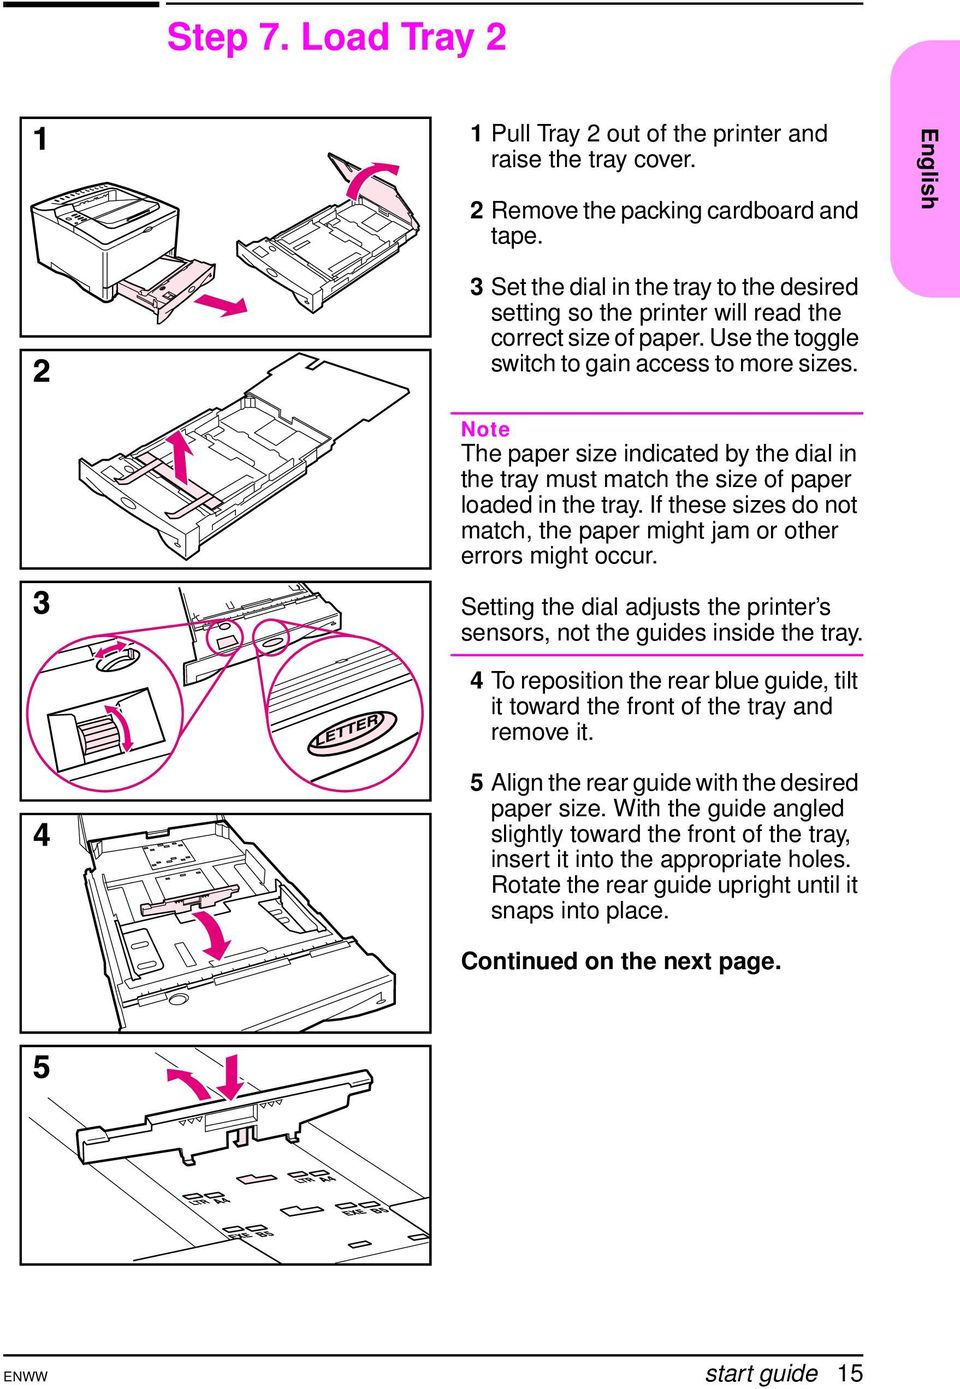 Note The paper size indicated by the dial in the tray must match the size of paper loaded in the tray. If these sizes do not match, the paper might jam or other errors might occur.